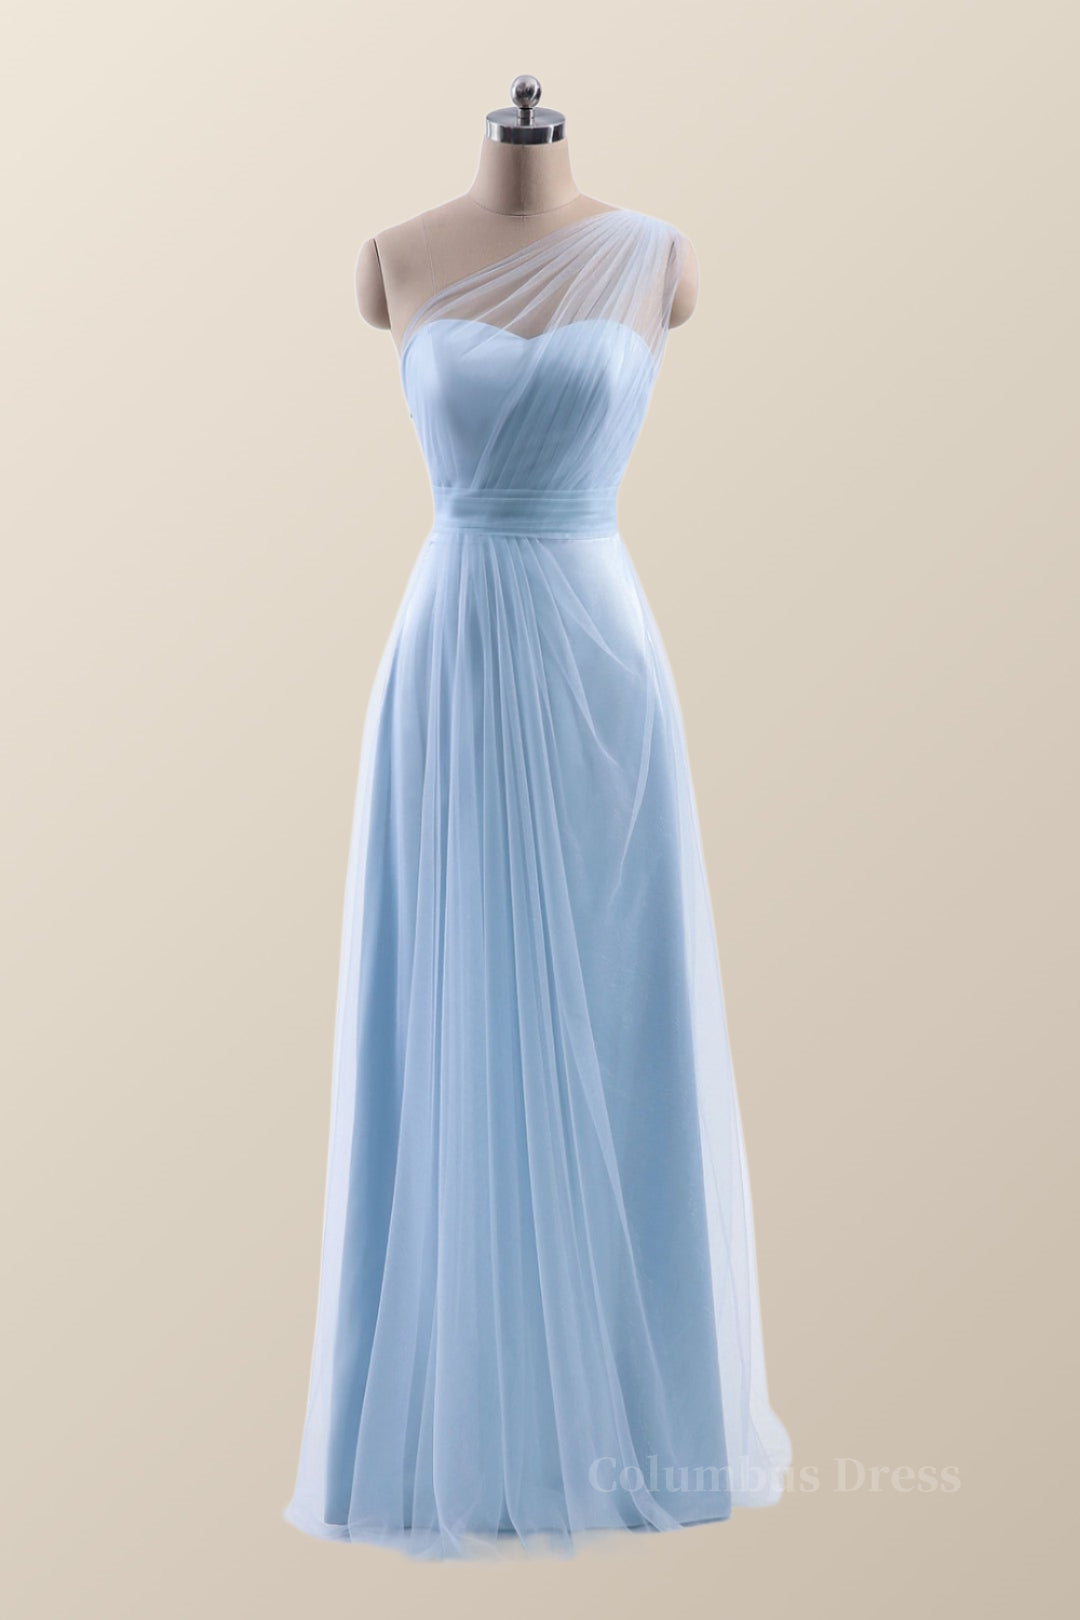 One Shoulder Light Blue Tulle A-line Corset Bridesmaid Dress outfit, Party Dress Hair Style